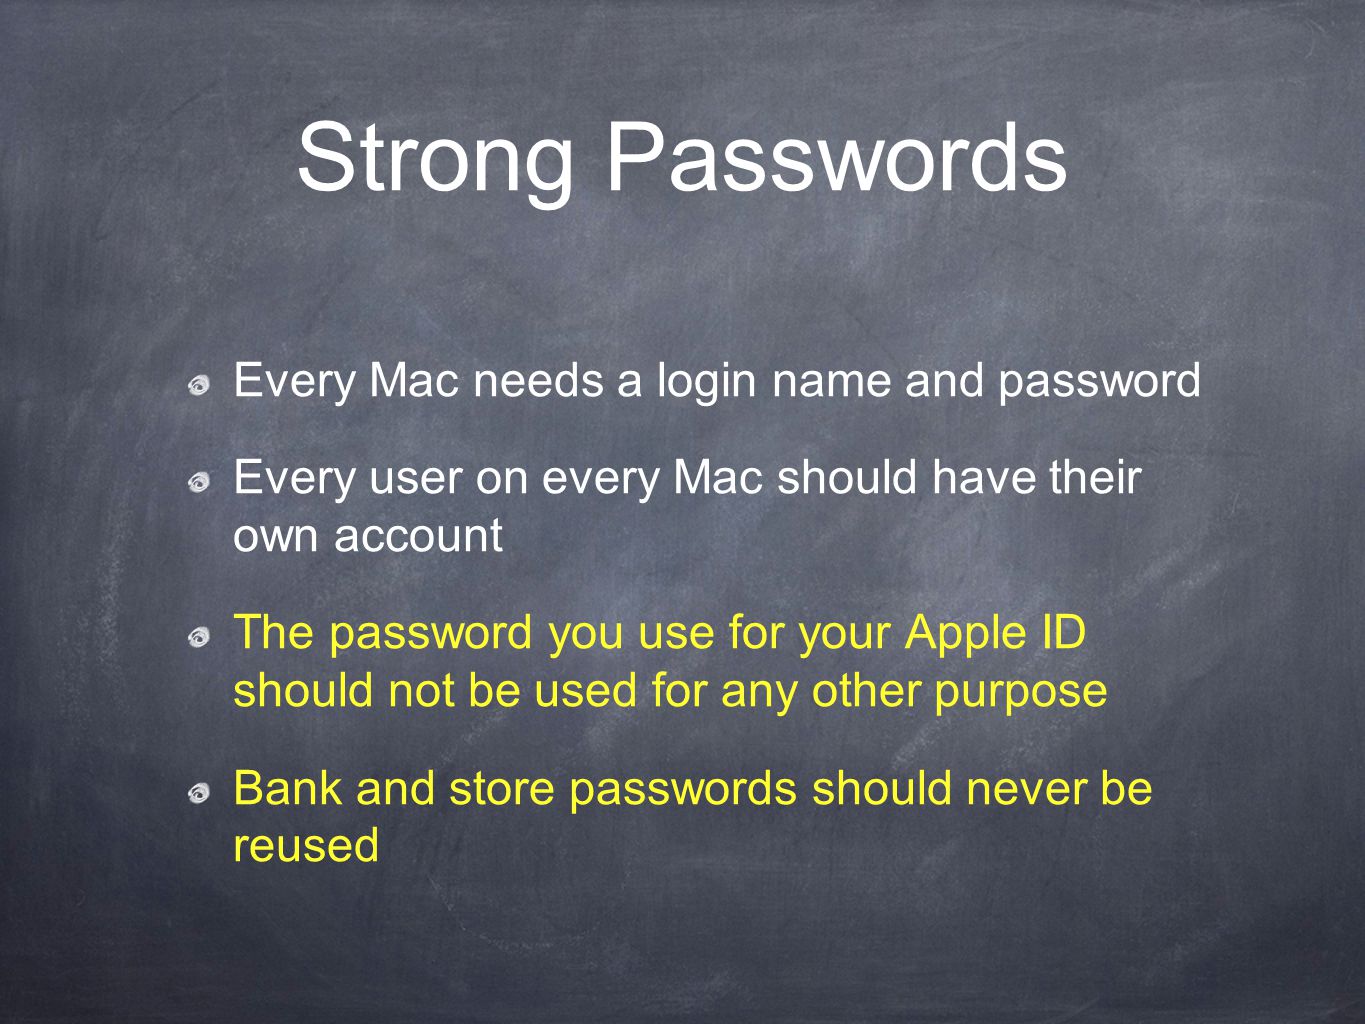 Strong Passwords Every Mac needs a login name and password Every user on every Mac should have their own account The password you use for your Apple ID should not be used for any other purpose Bank and store passwords should never be reused